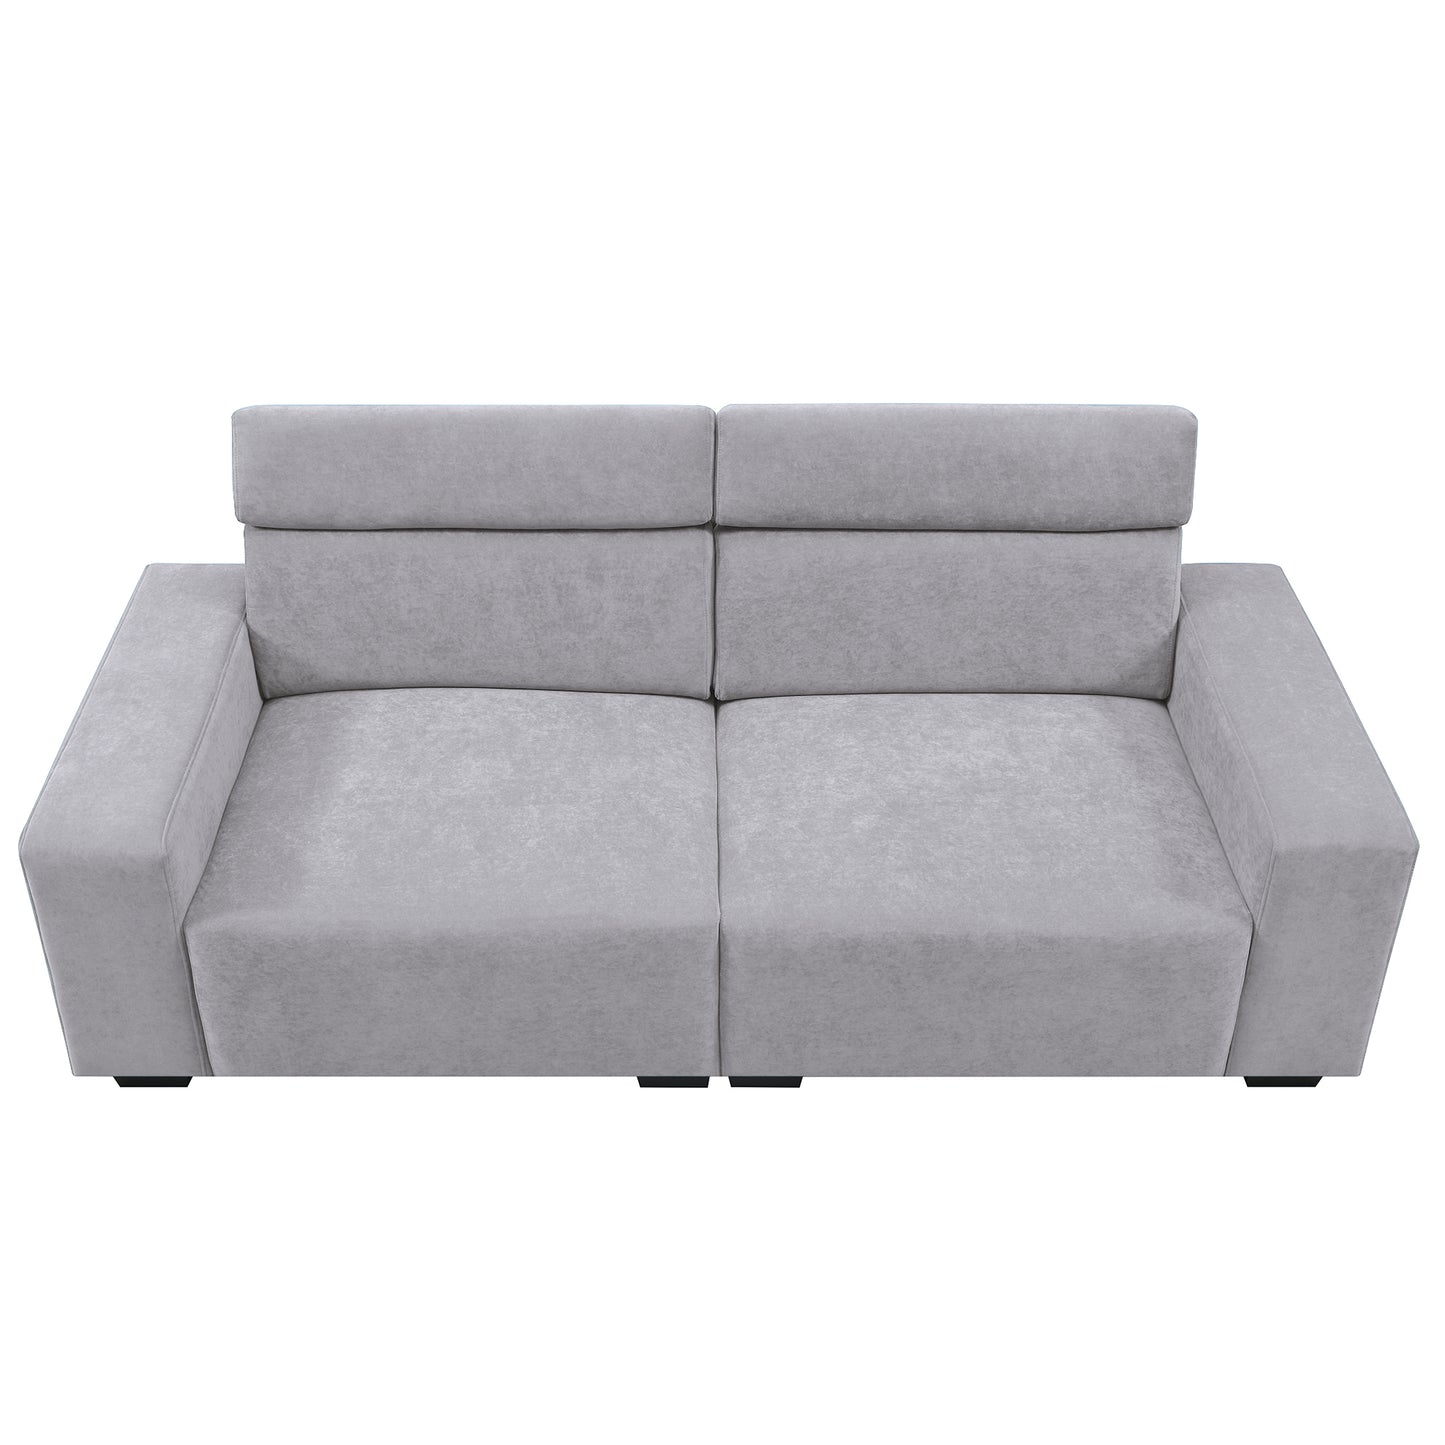 Doral Gray Sectional Sofa Couch w/ Multi-Angle Adjustable Headrest